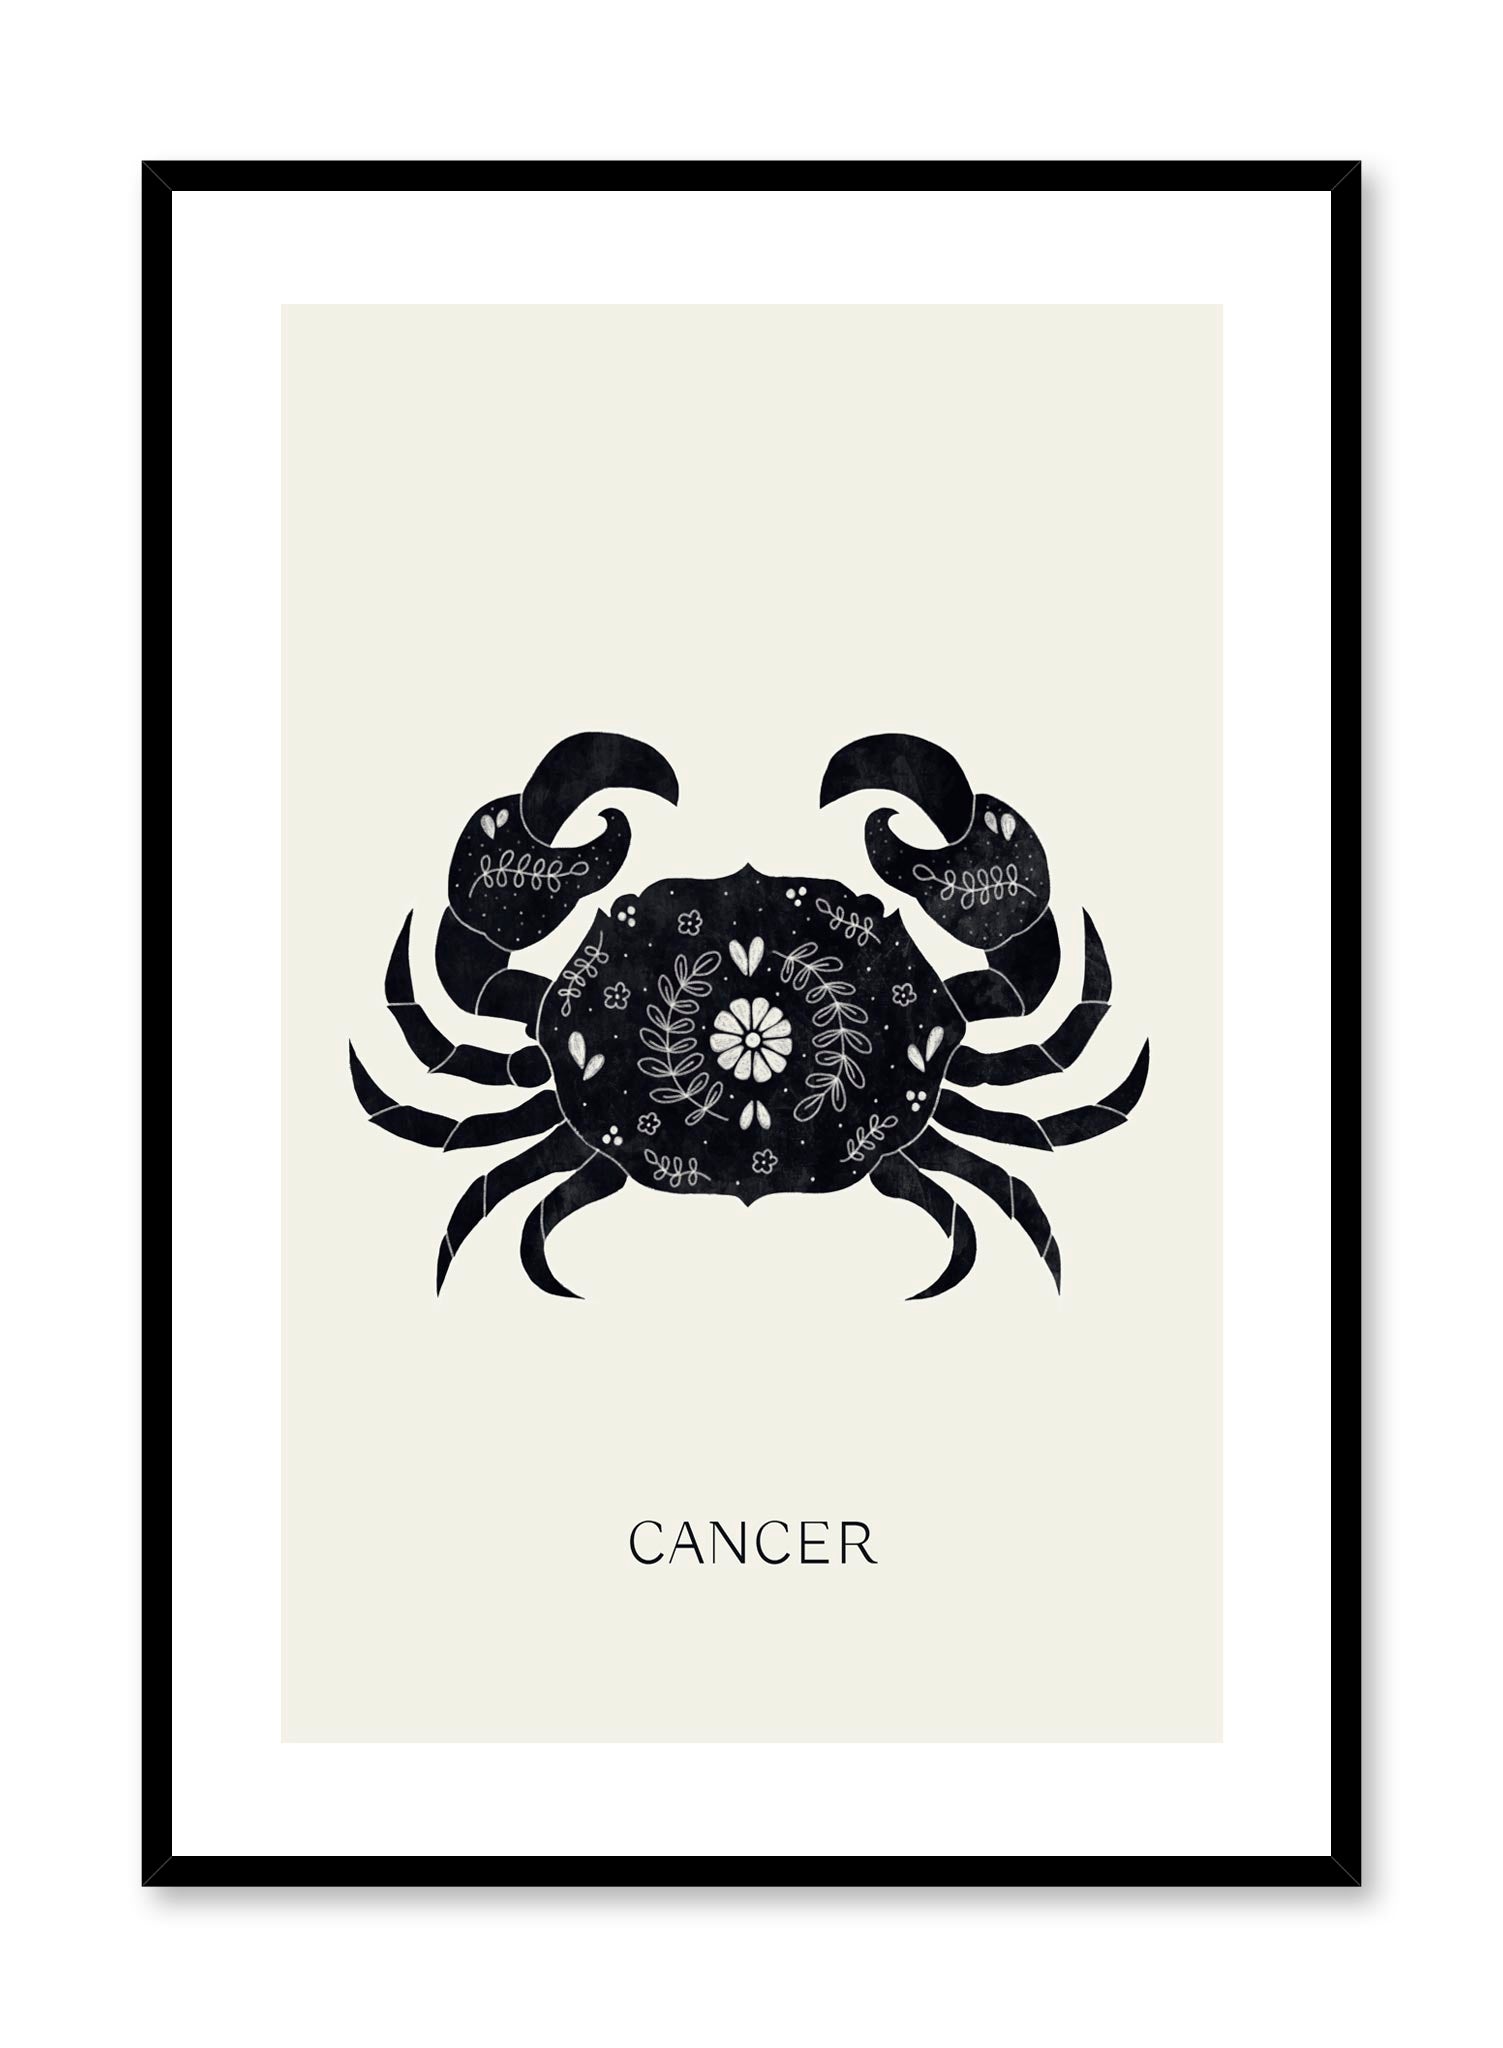 Celestial Illustration poster by Opposite Wall with horoscope zodiac symbol of Cancer crab